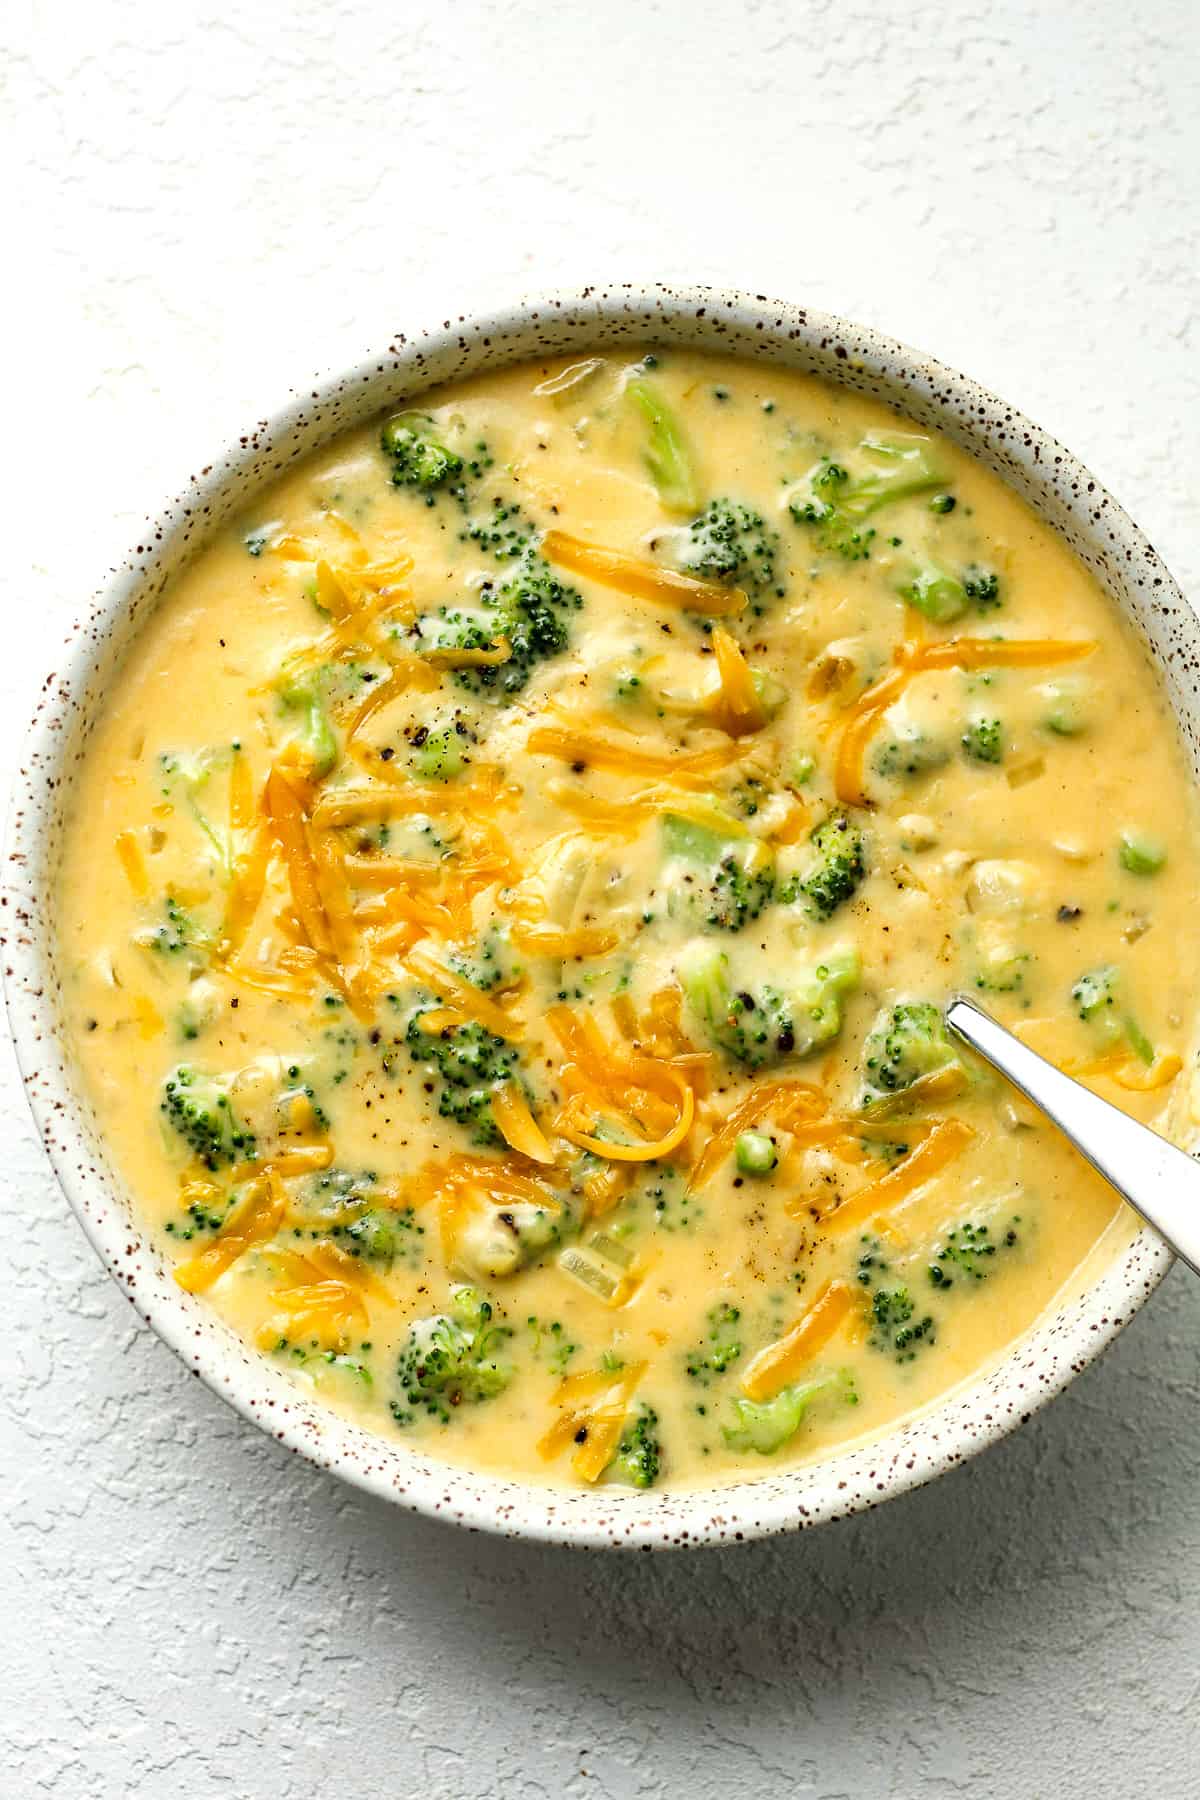 A bowl of the broccoli cheese sauce.